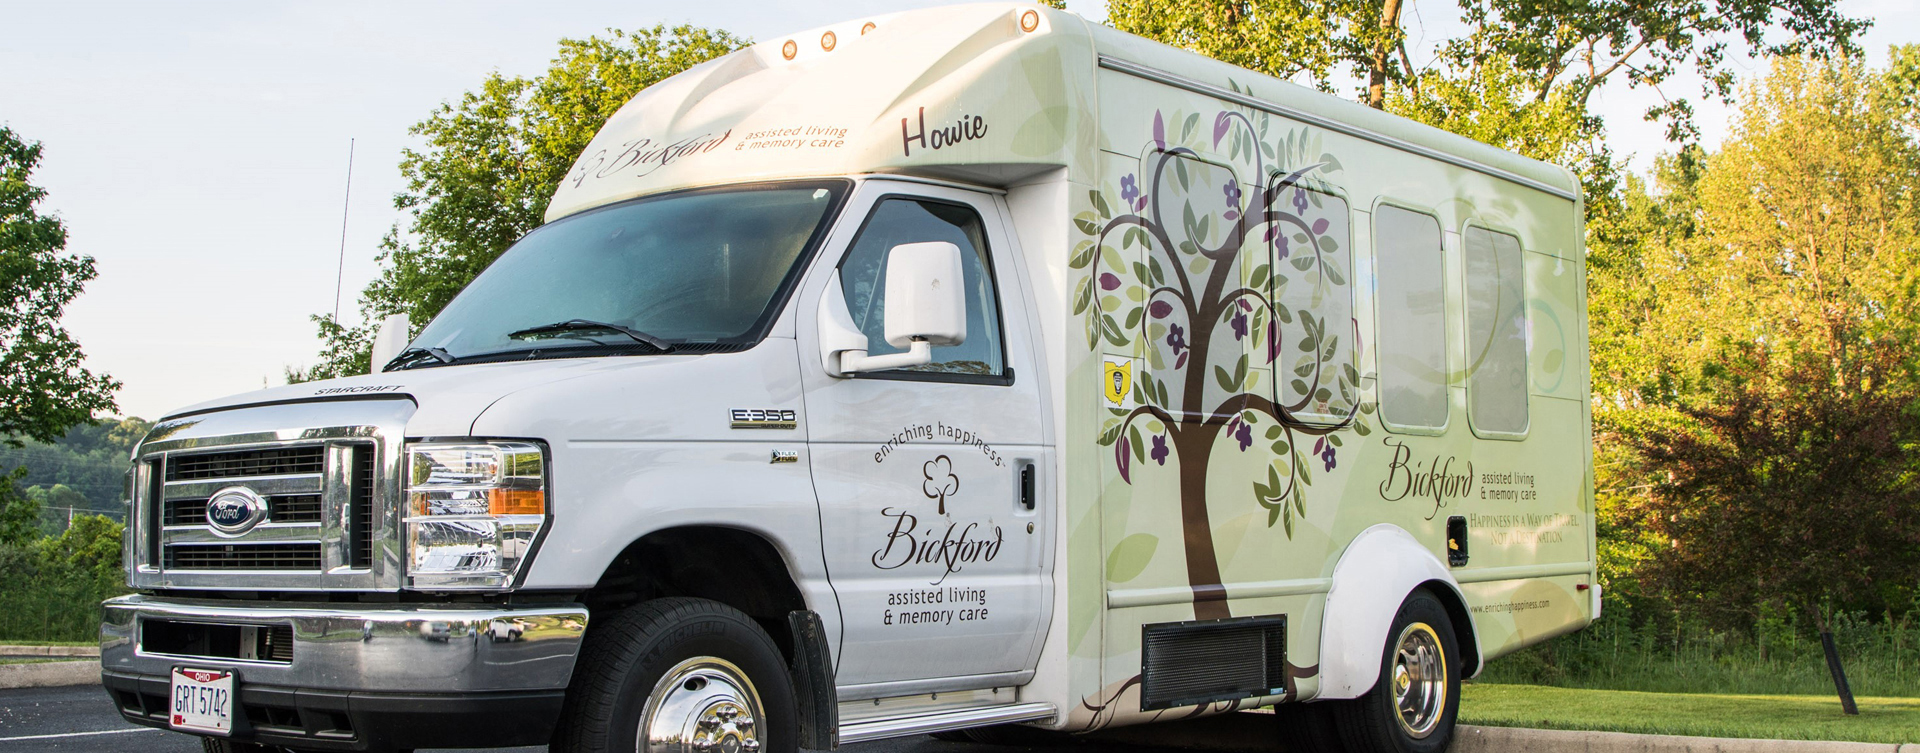 Participate in community outings aboard the Bickford bus HOWIE at Bickford of Shelby Township